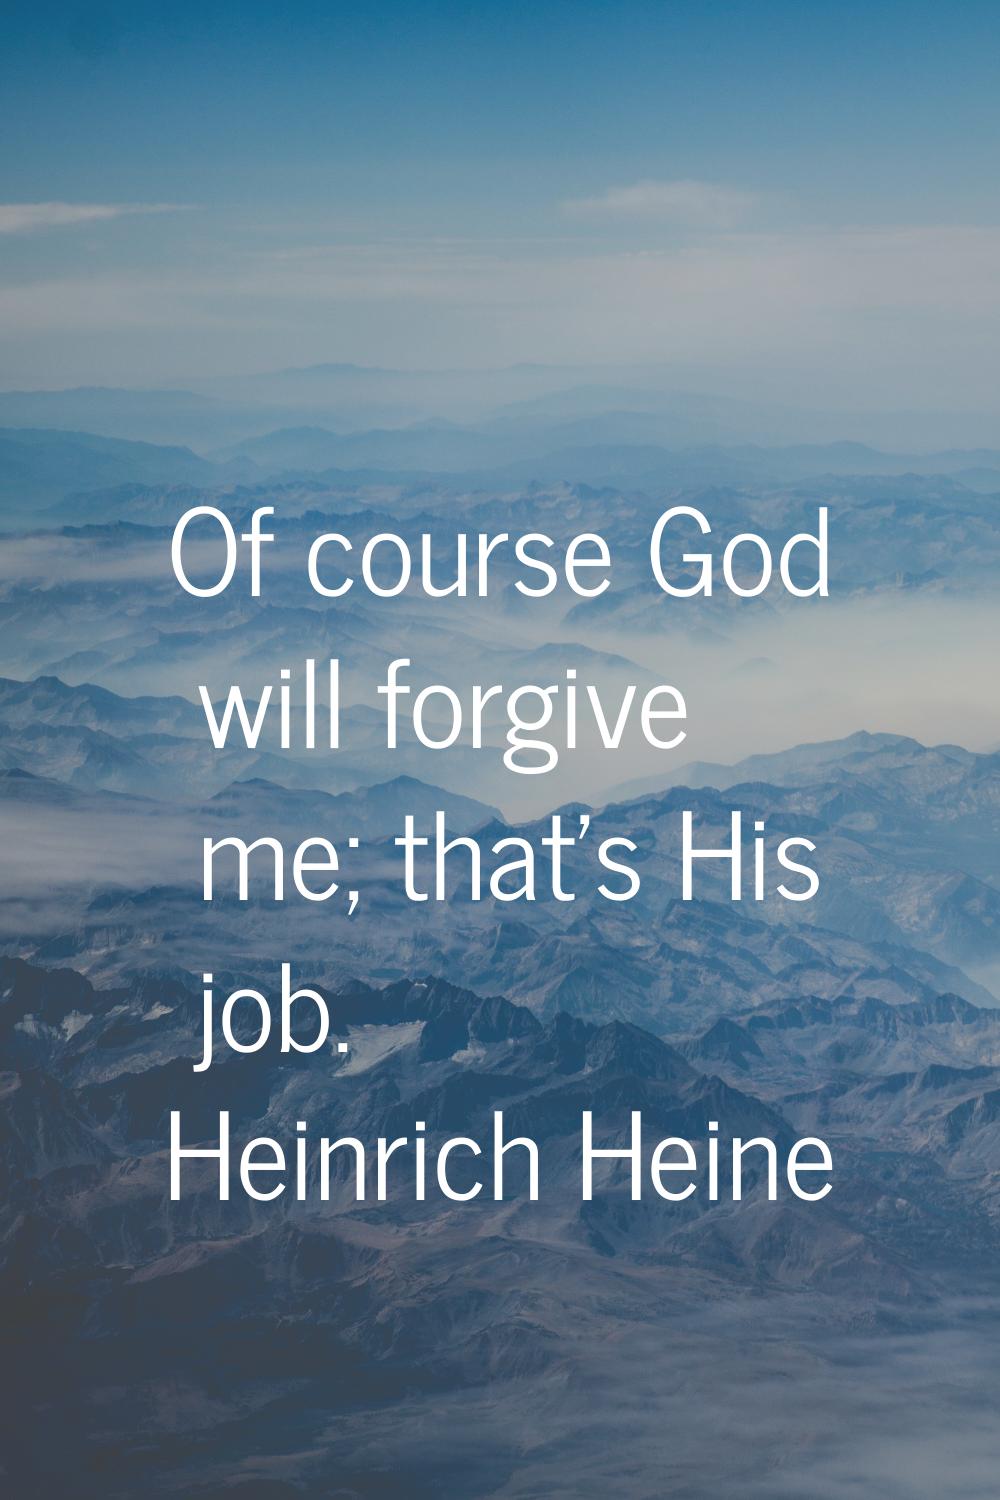 Of course God will forgive me; that's His job.